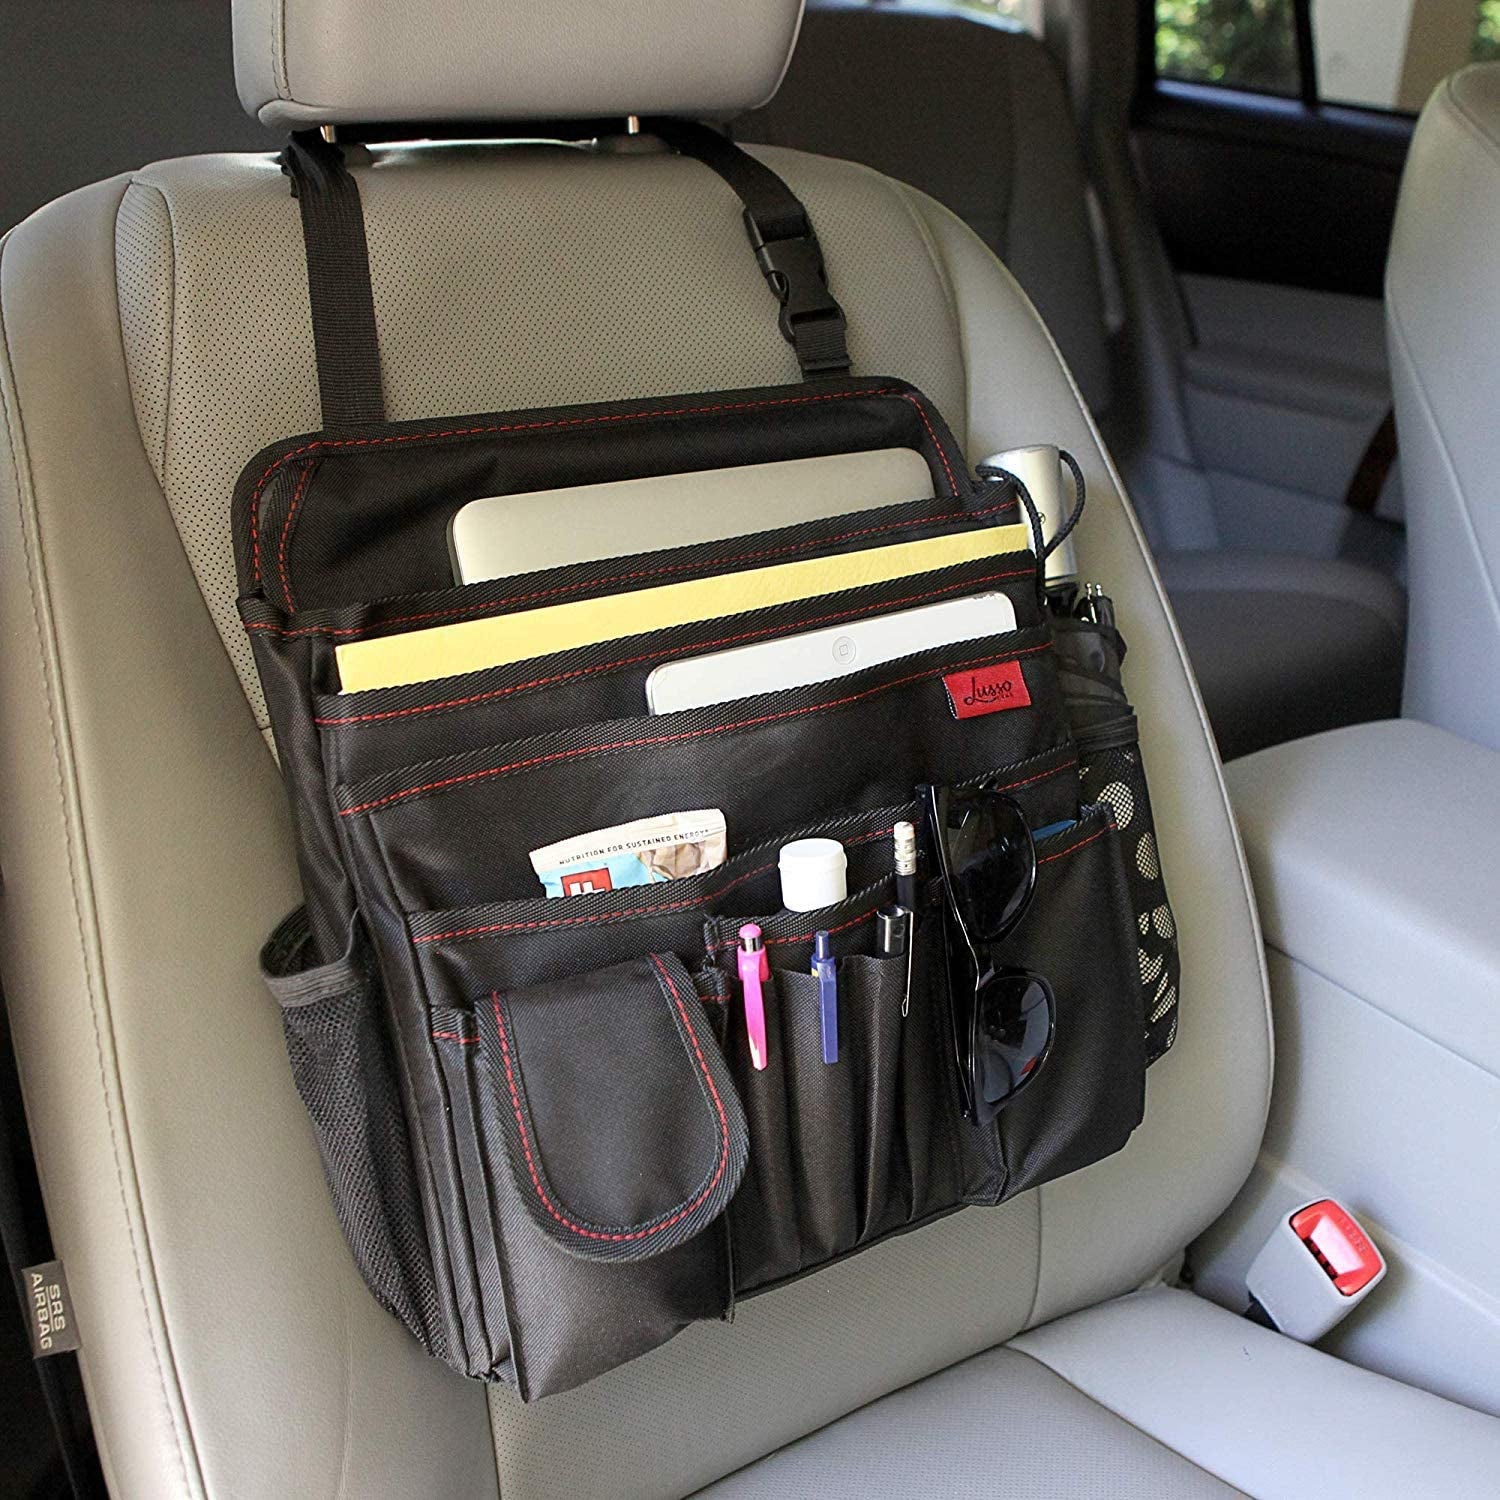 Car Front Seat Organizer | Fits Any Car/Truck - Storage for Laptop/Ipad/Office Supplies & More - Strong & Durable - Mobile/Car Office Organizer - Also for Law Enforcement/Police/Patrol Bag